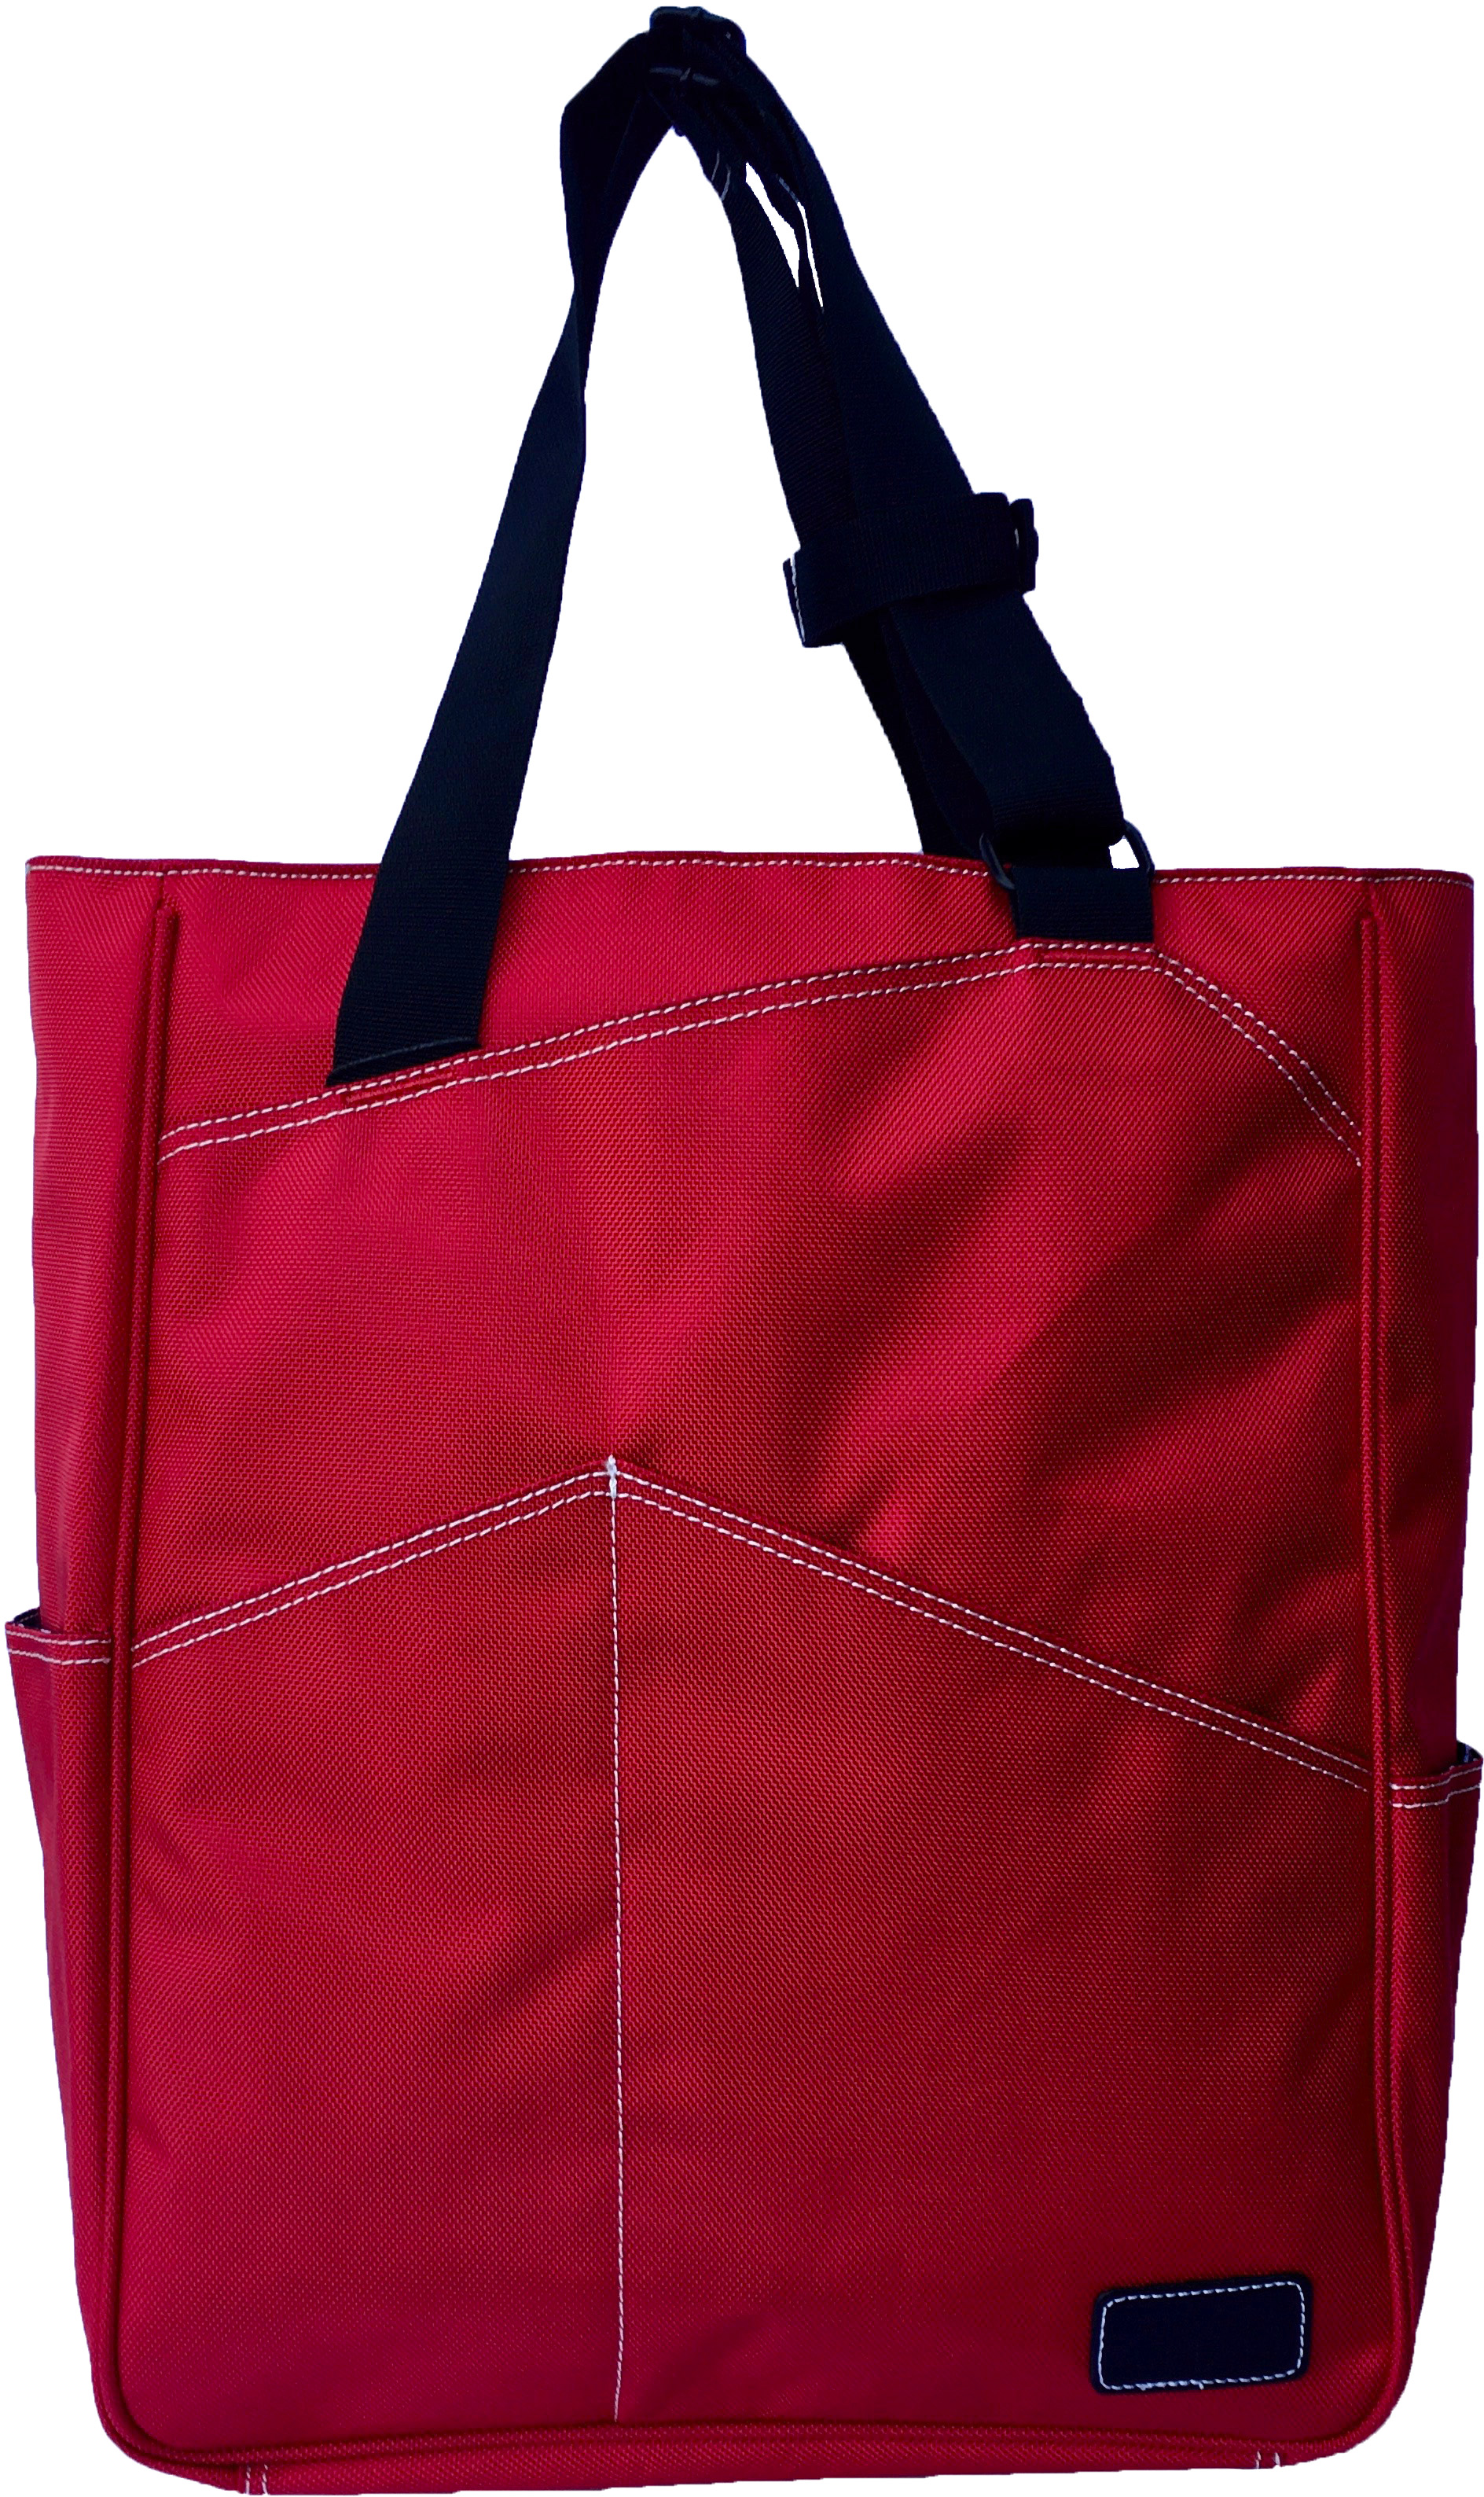 Maggie Mather Tennis Tote with Zipper Closure (Red)